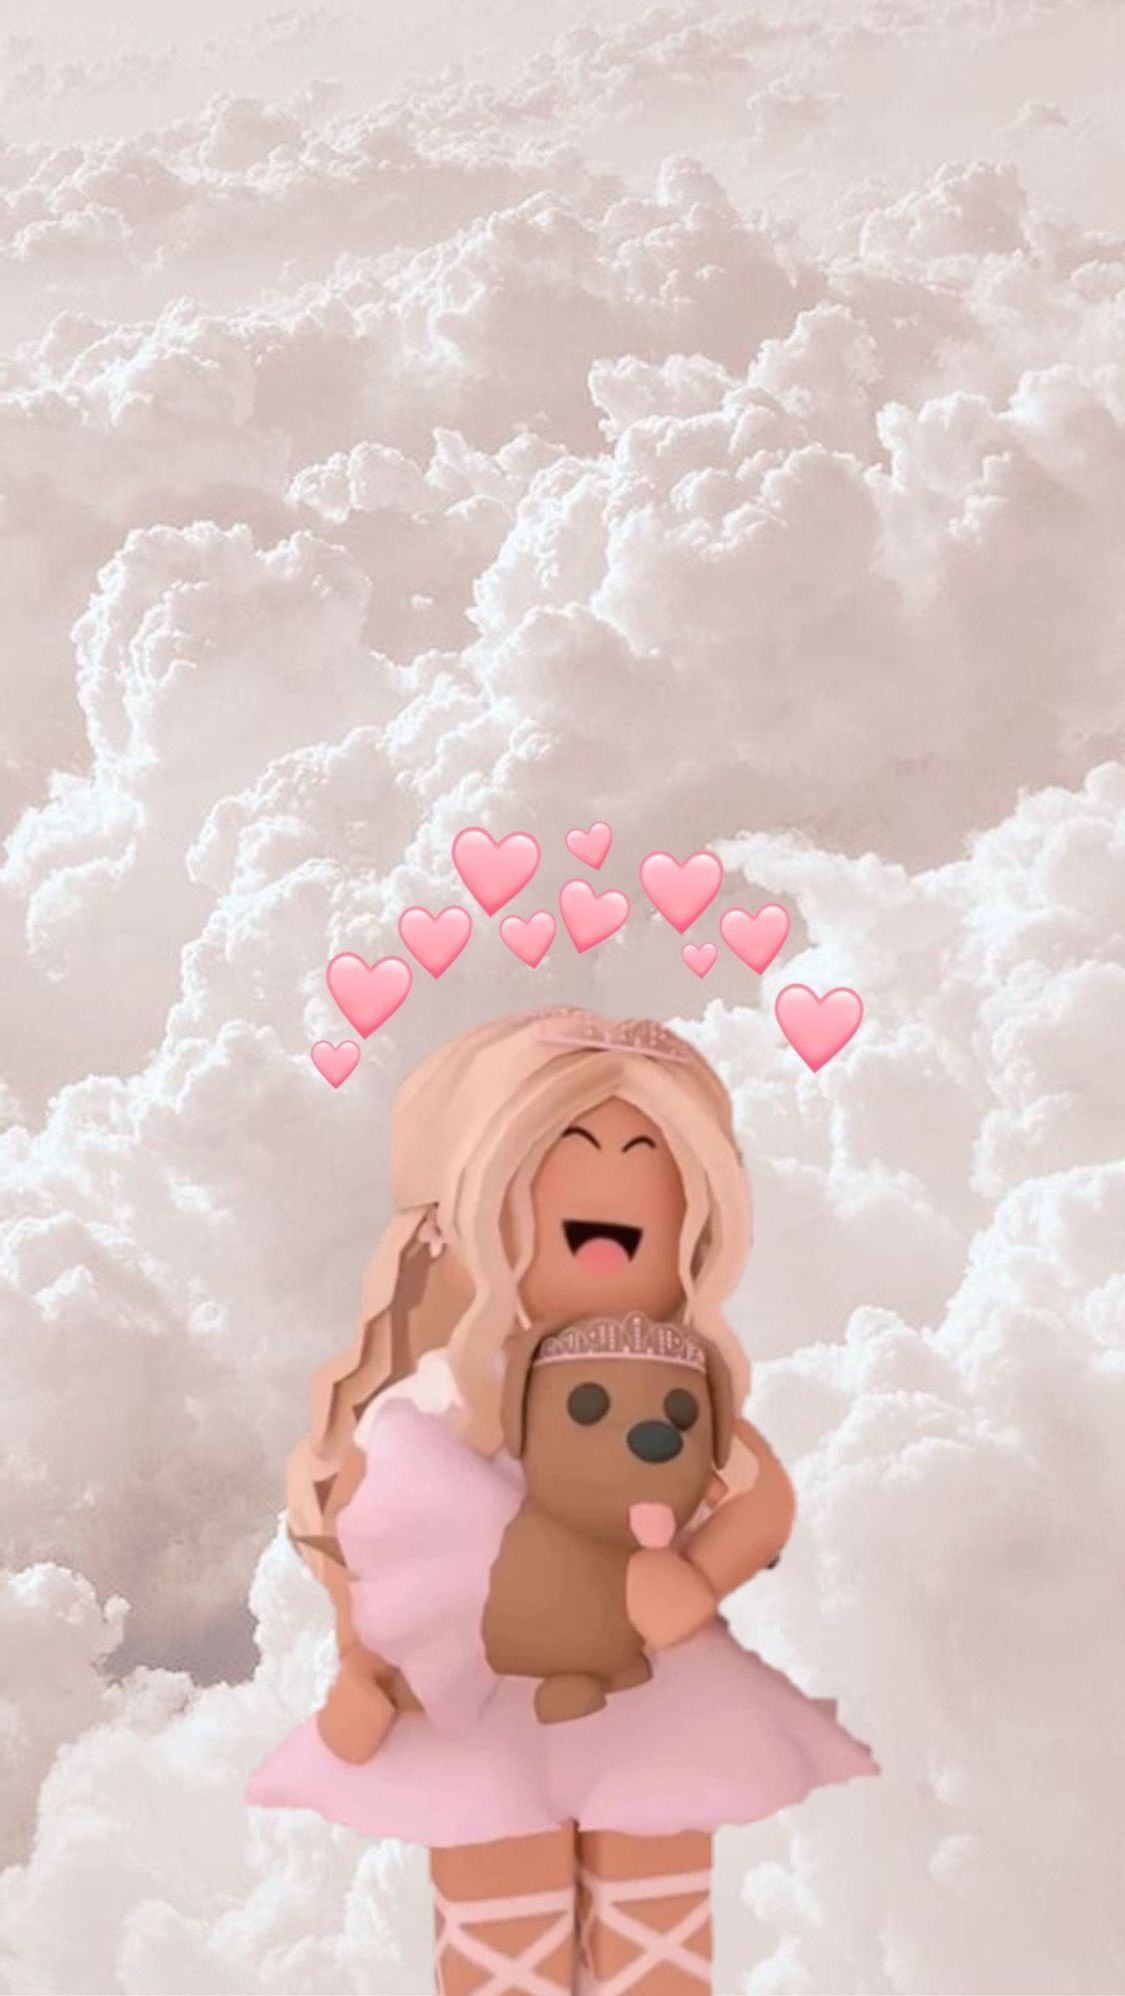 Roblox Girl Wallpaper for mobile phone, tablet, desktop computer and other devices HD and 4K wallpaper. Cute tumblr wallpaper, Roblox animation, Roblox picture